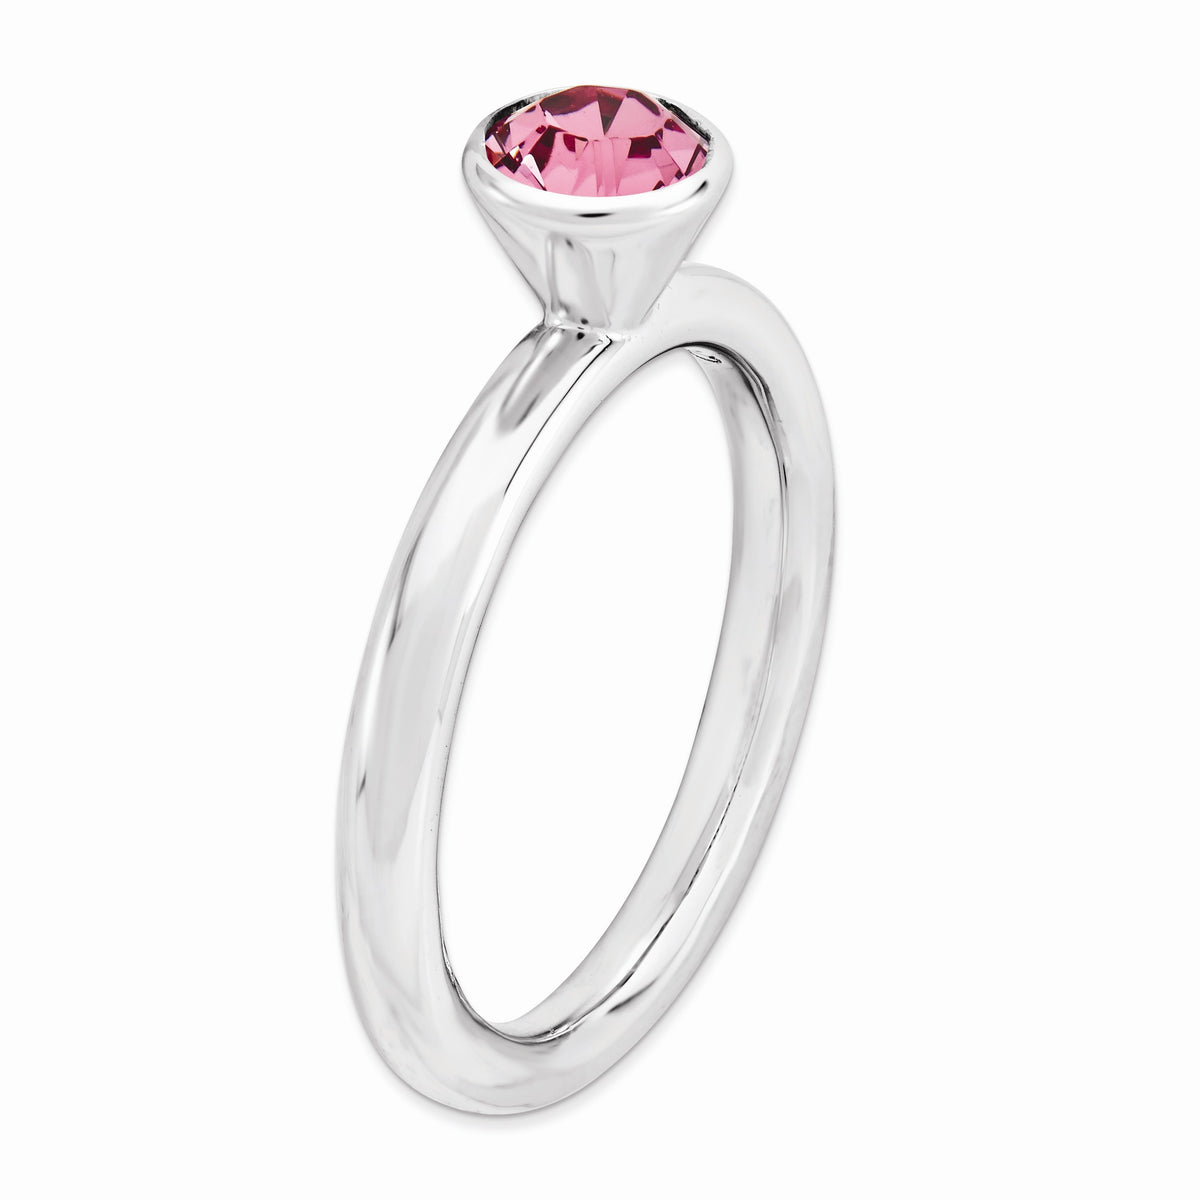 Alternate view of the 5mm High Profile Sterling Silver w/ Pink Crystals Stack Ring by The Black Bow Jewelry Co.